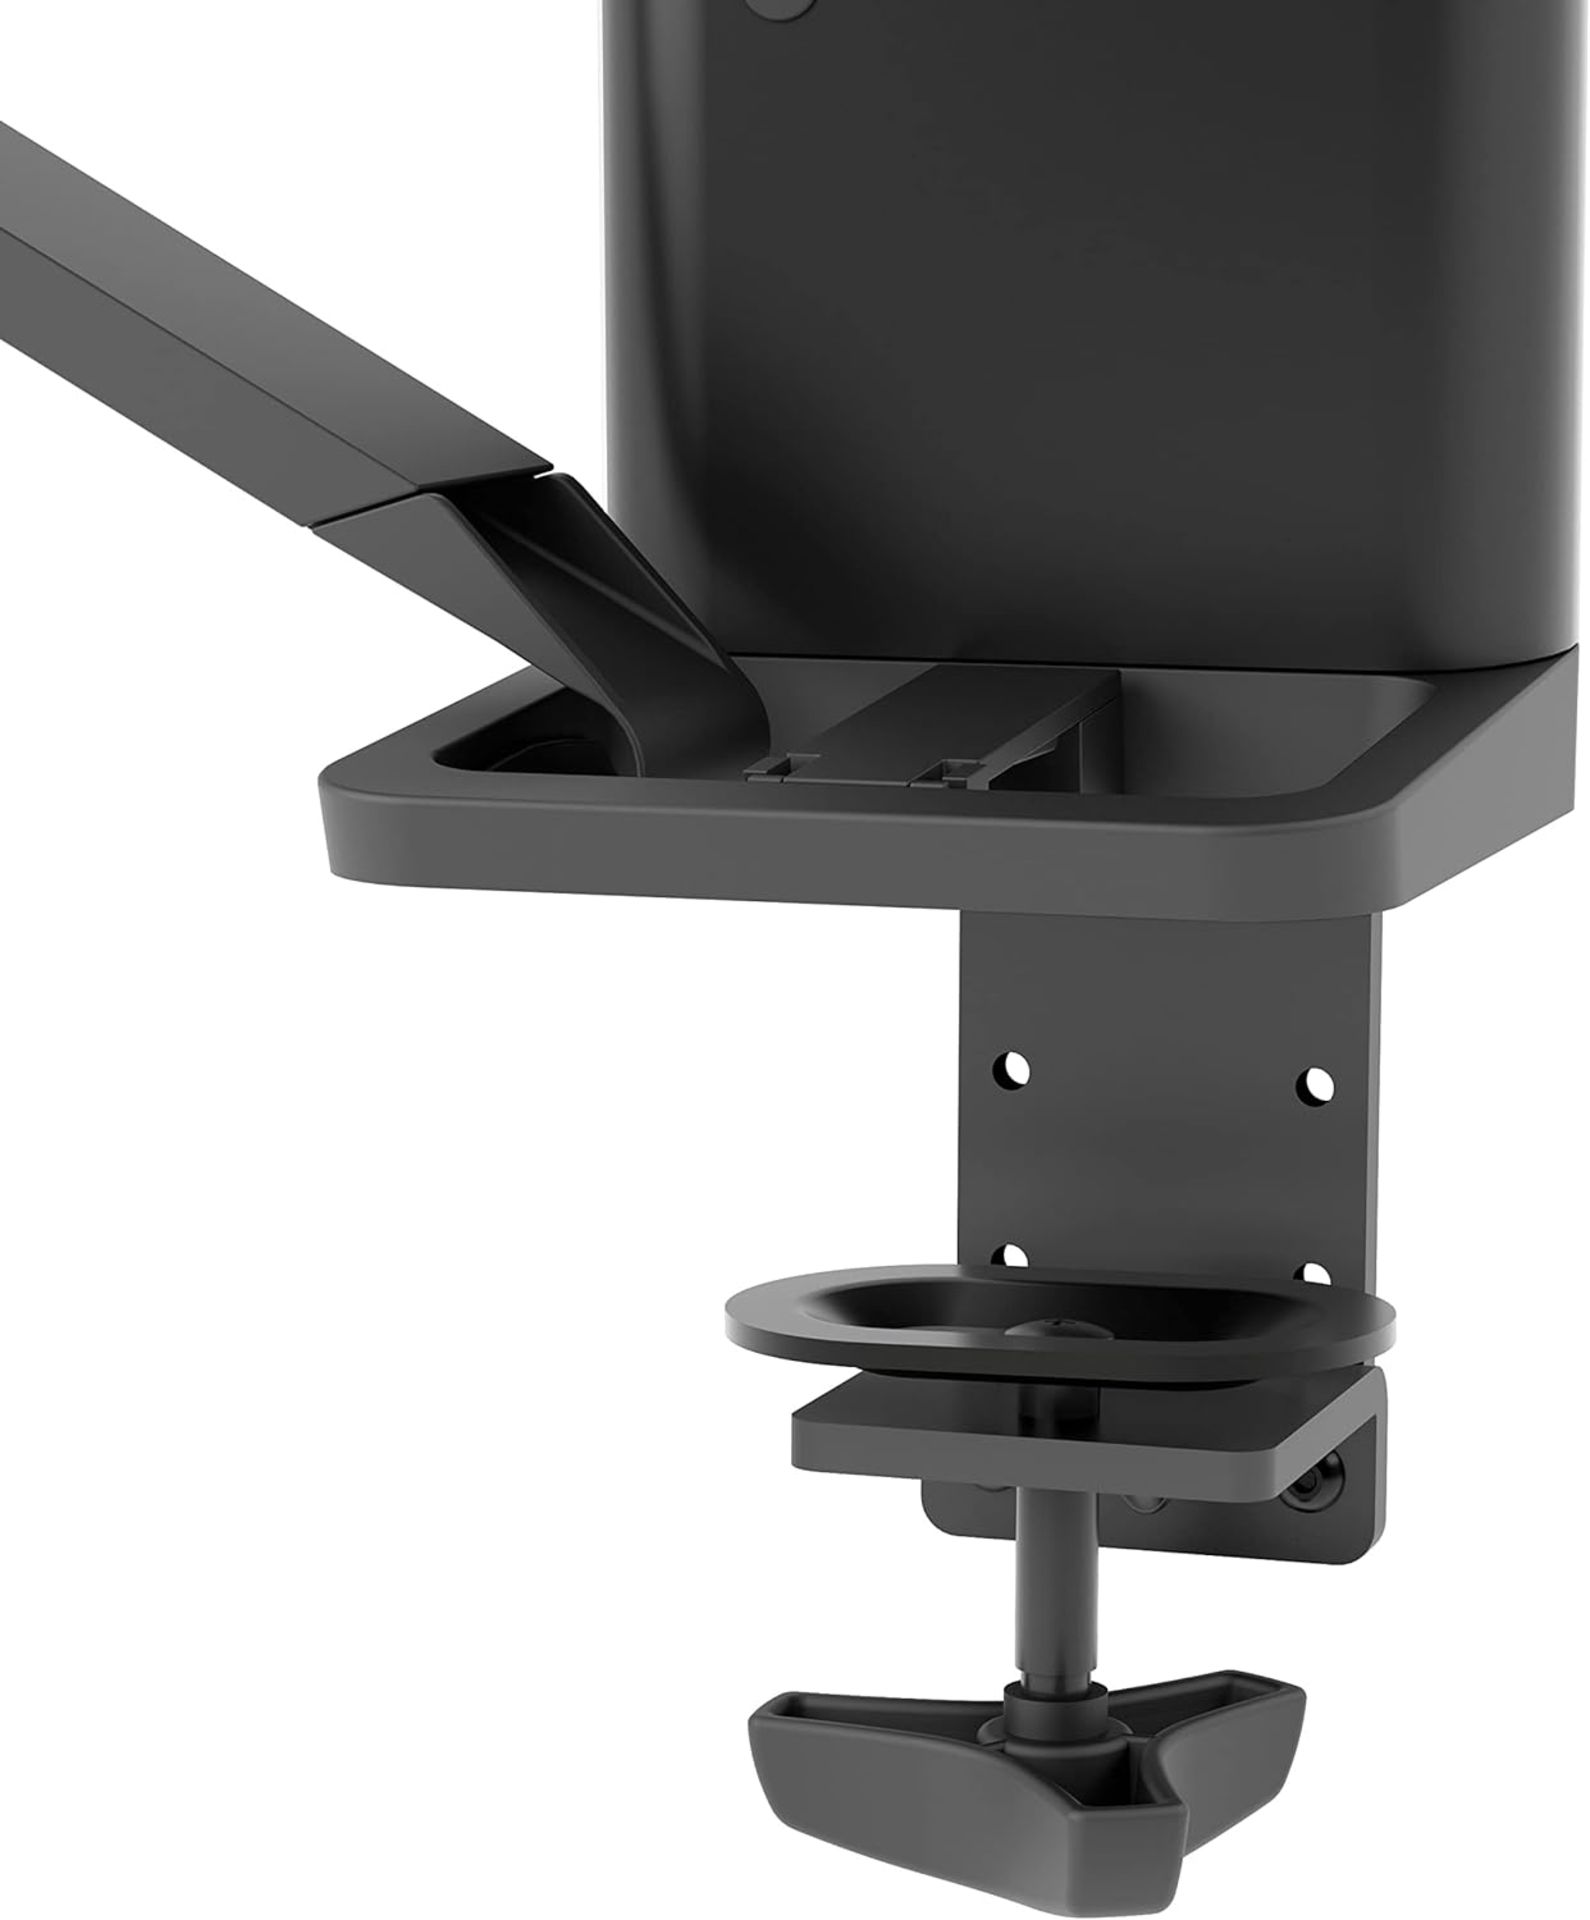 NEW & BOXED ERGOTRON Trace Dual Monitor Arm, VESA Desk Mount. RRP £417. for 2 Monitors Up to 27 - Image 8 of 8